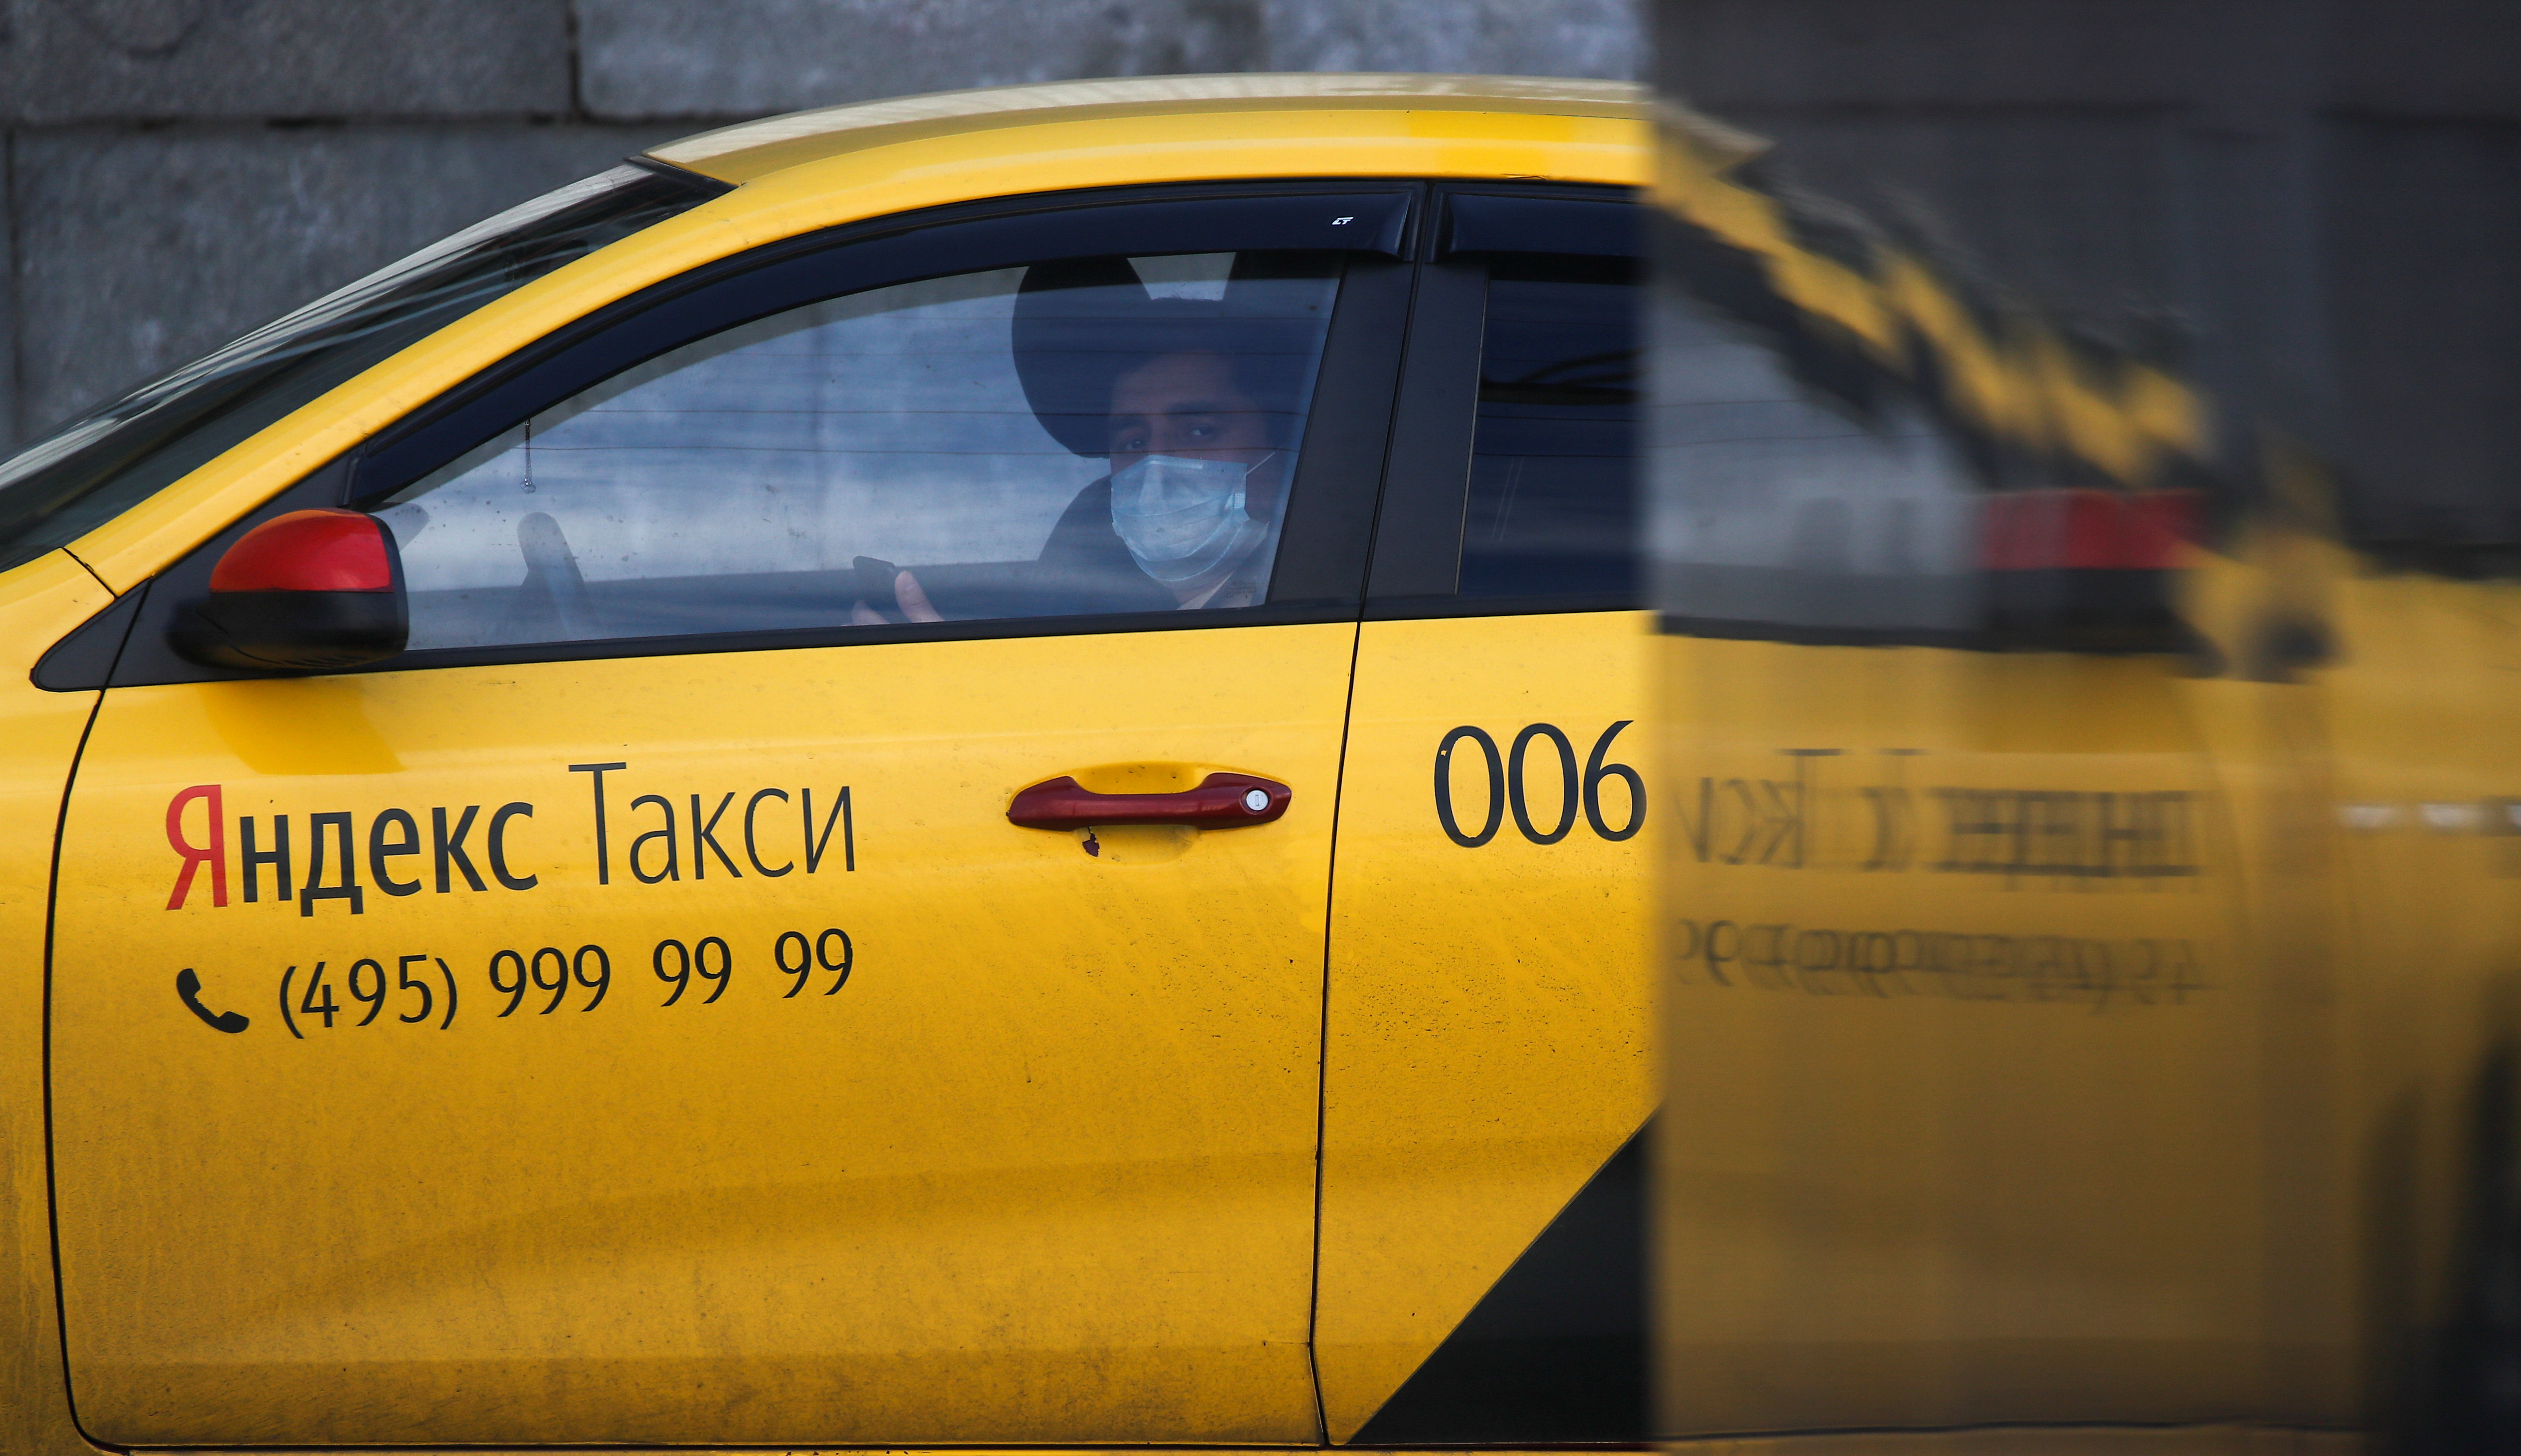 A driver of Yandex.Taxi online ride-sharing service sits inside a car in Moscow